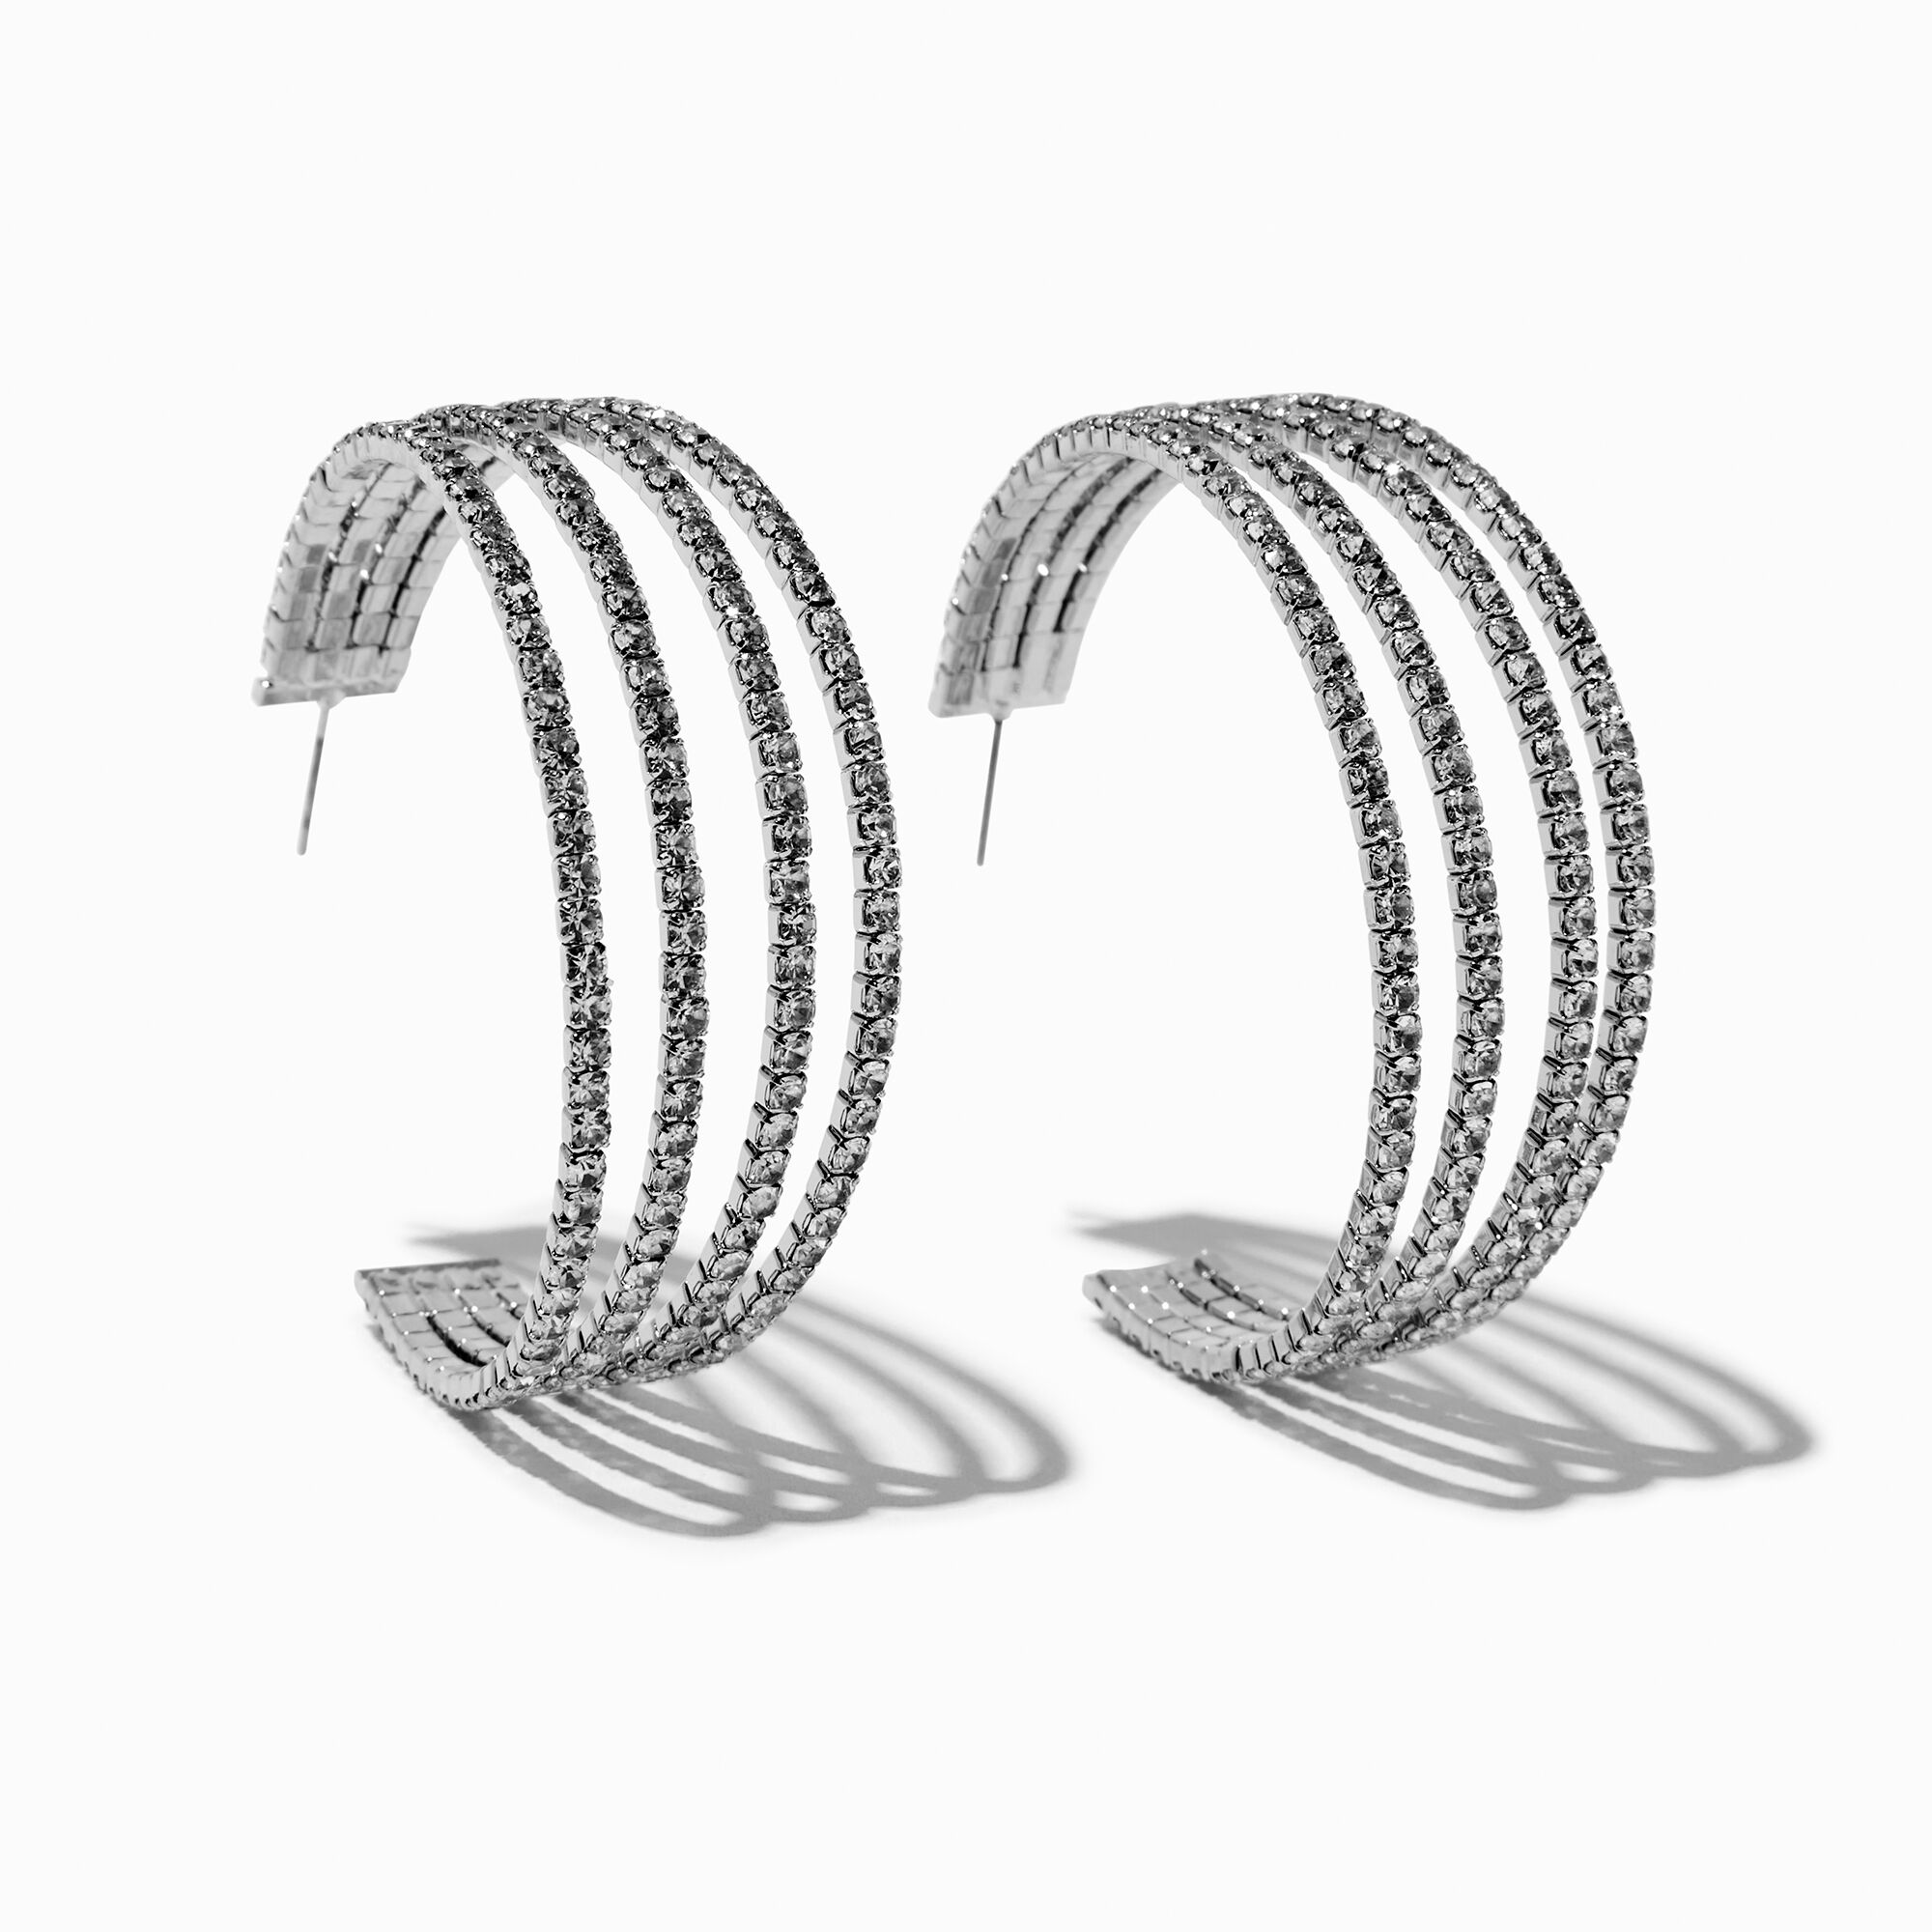 View Claires Tone Crystal MultiLayer 70MM Hoop Earrings Silver information